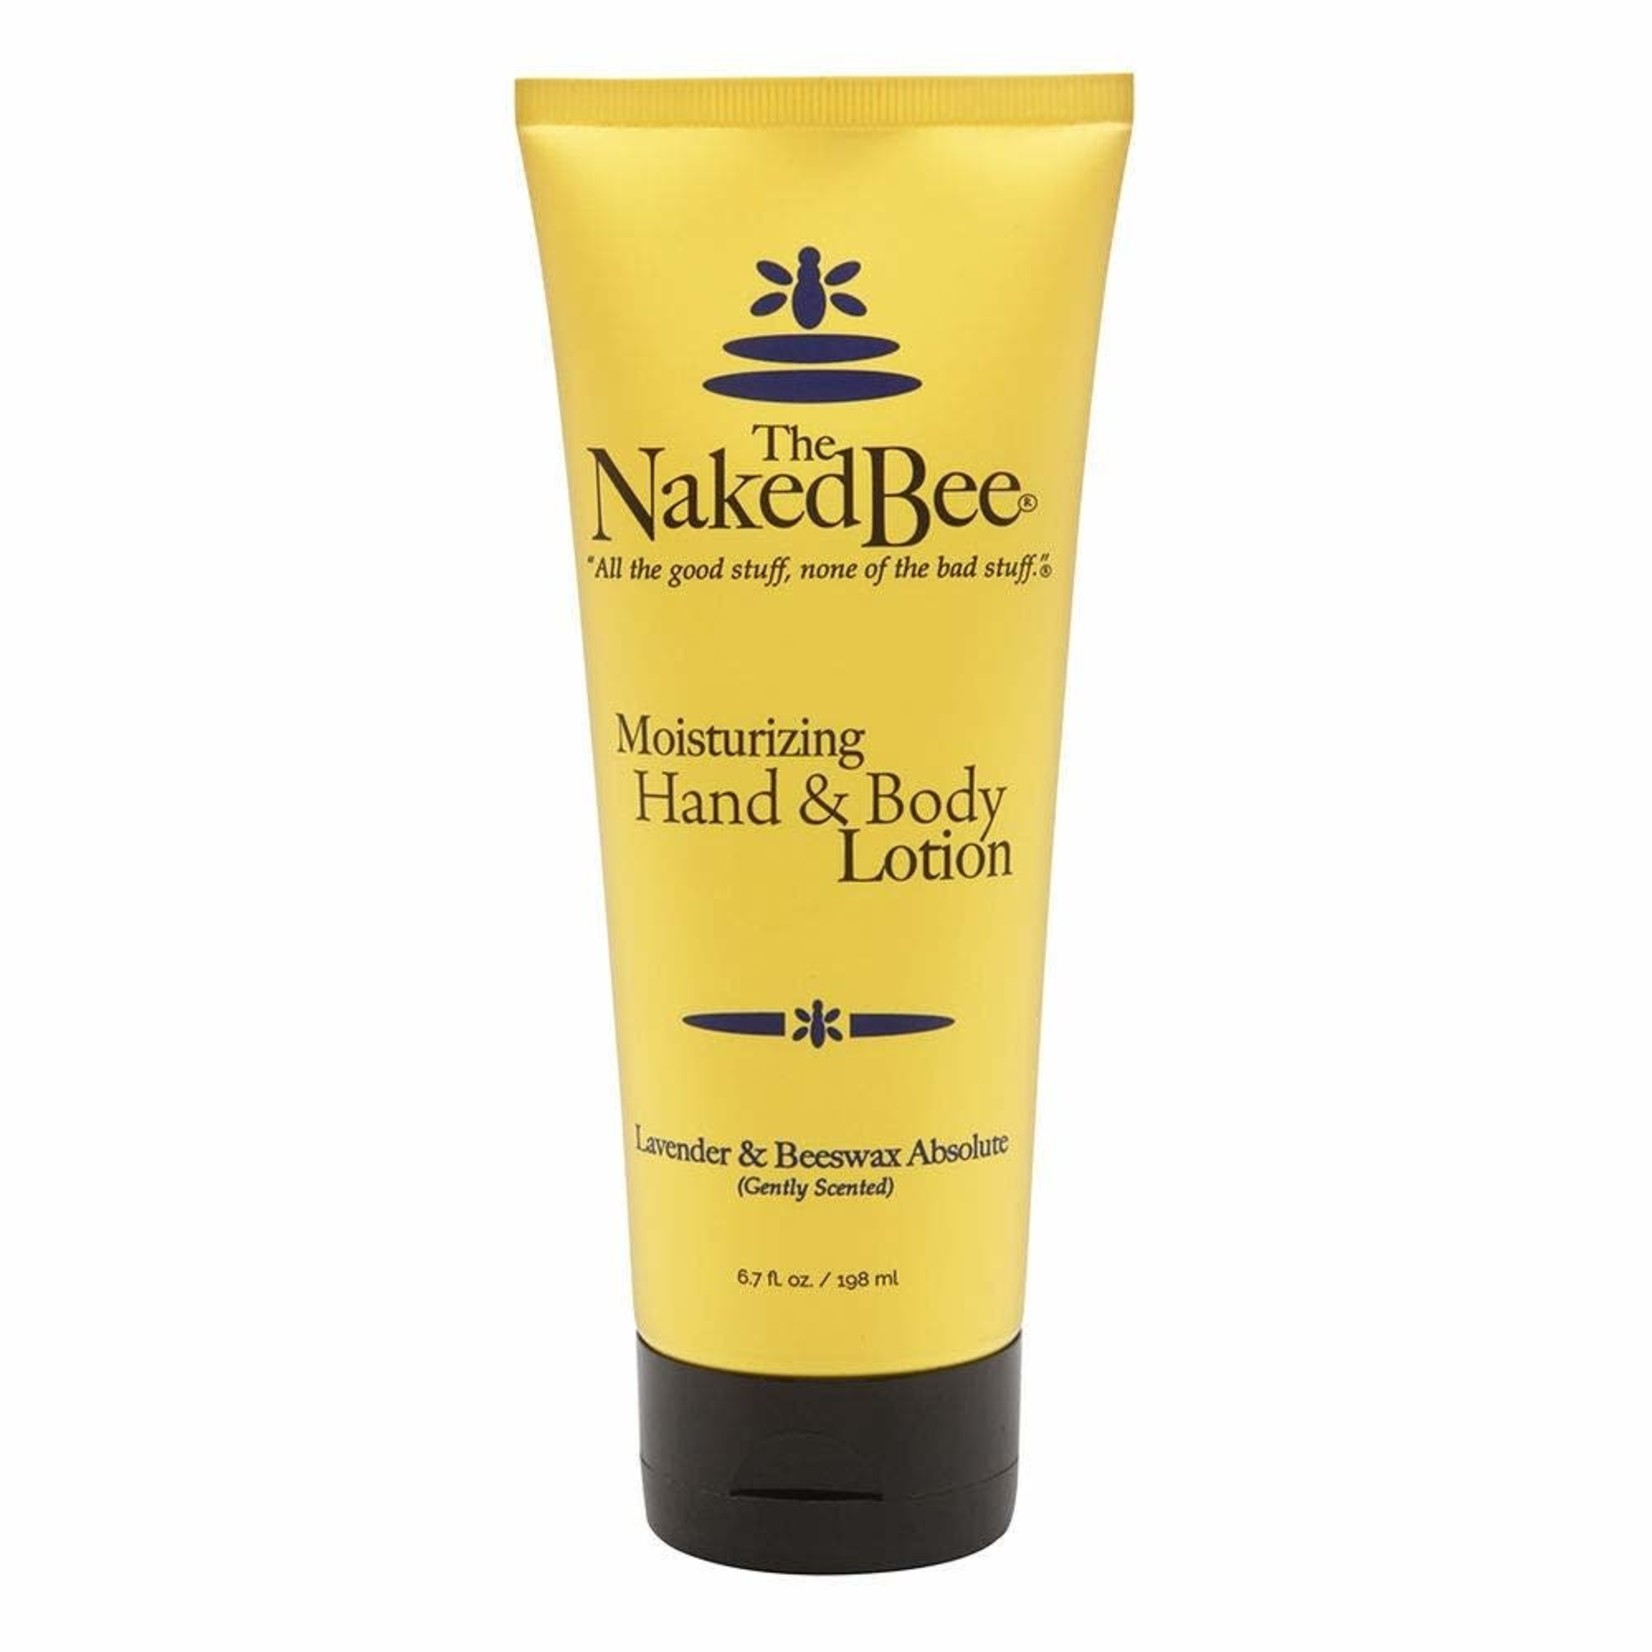 The Naked Bee 6.7 oz. Lavender & Beeswax Absolute Hand & Body Lotion